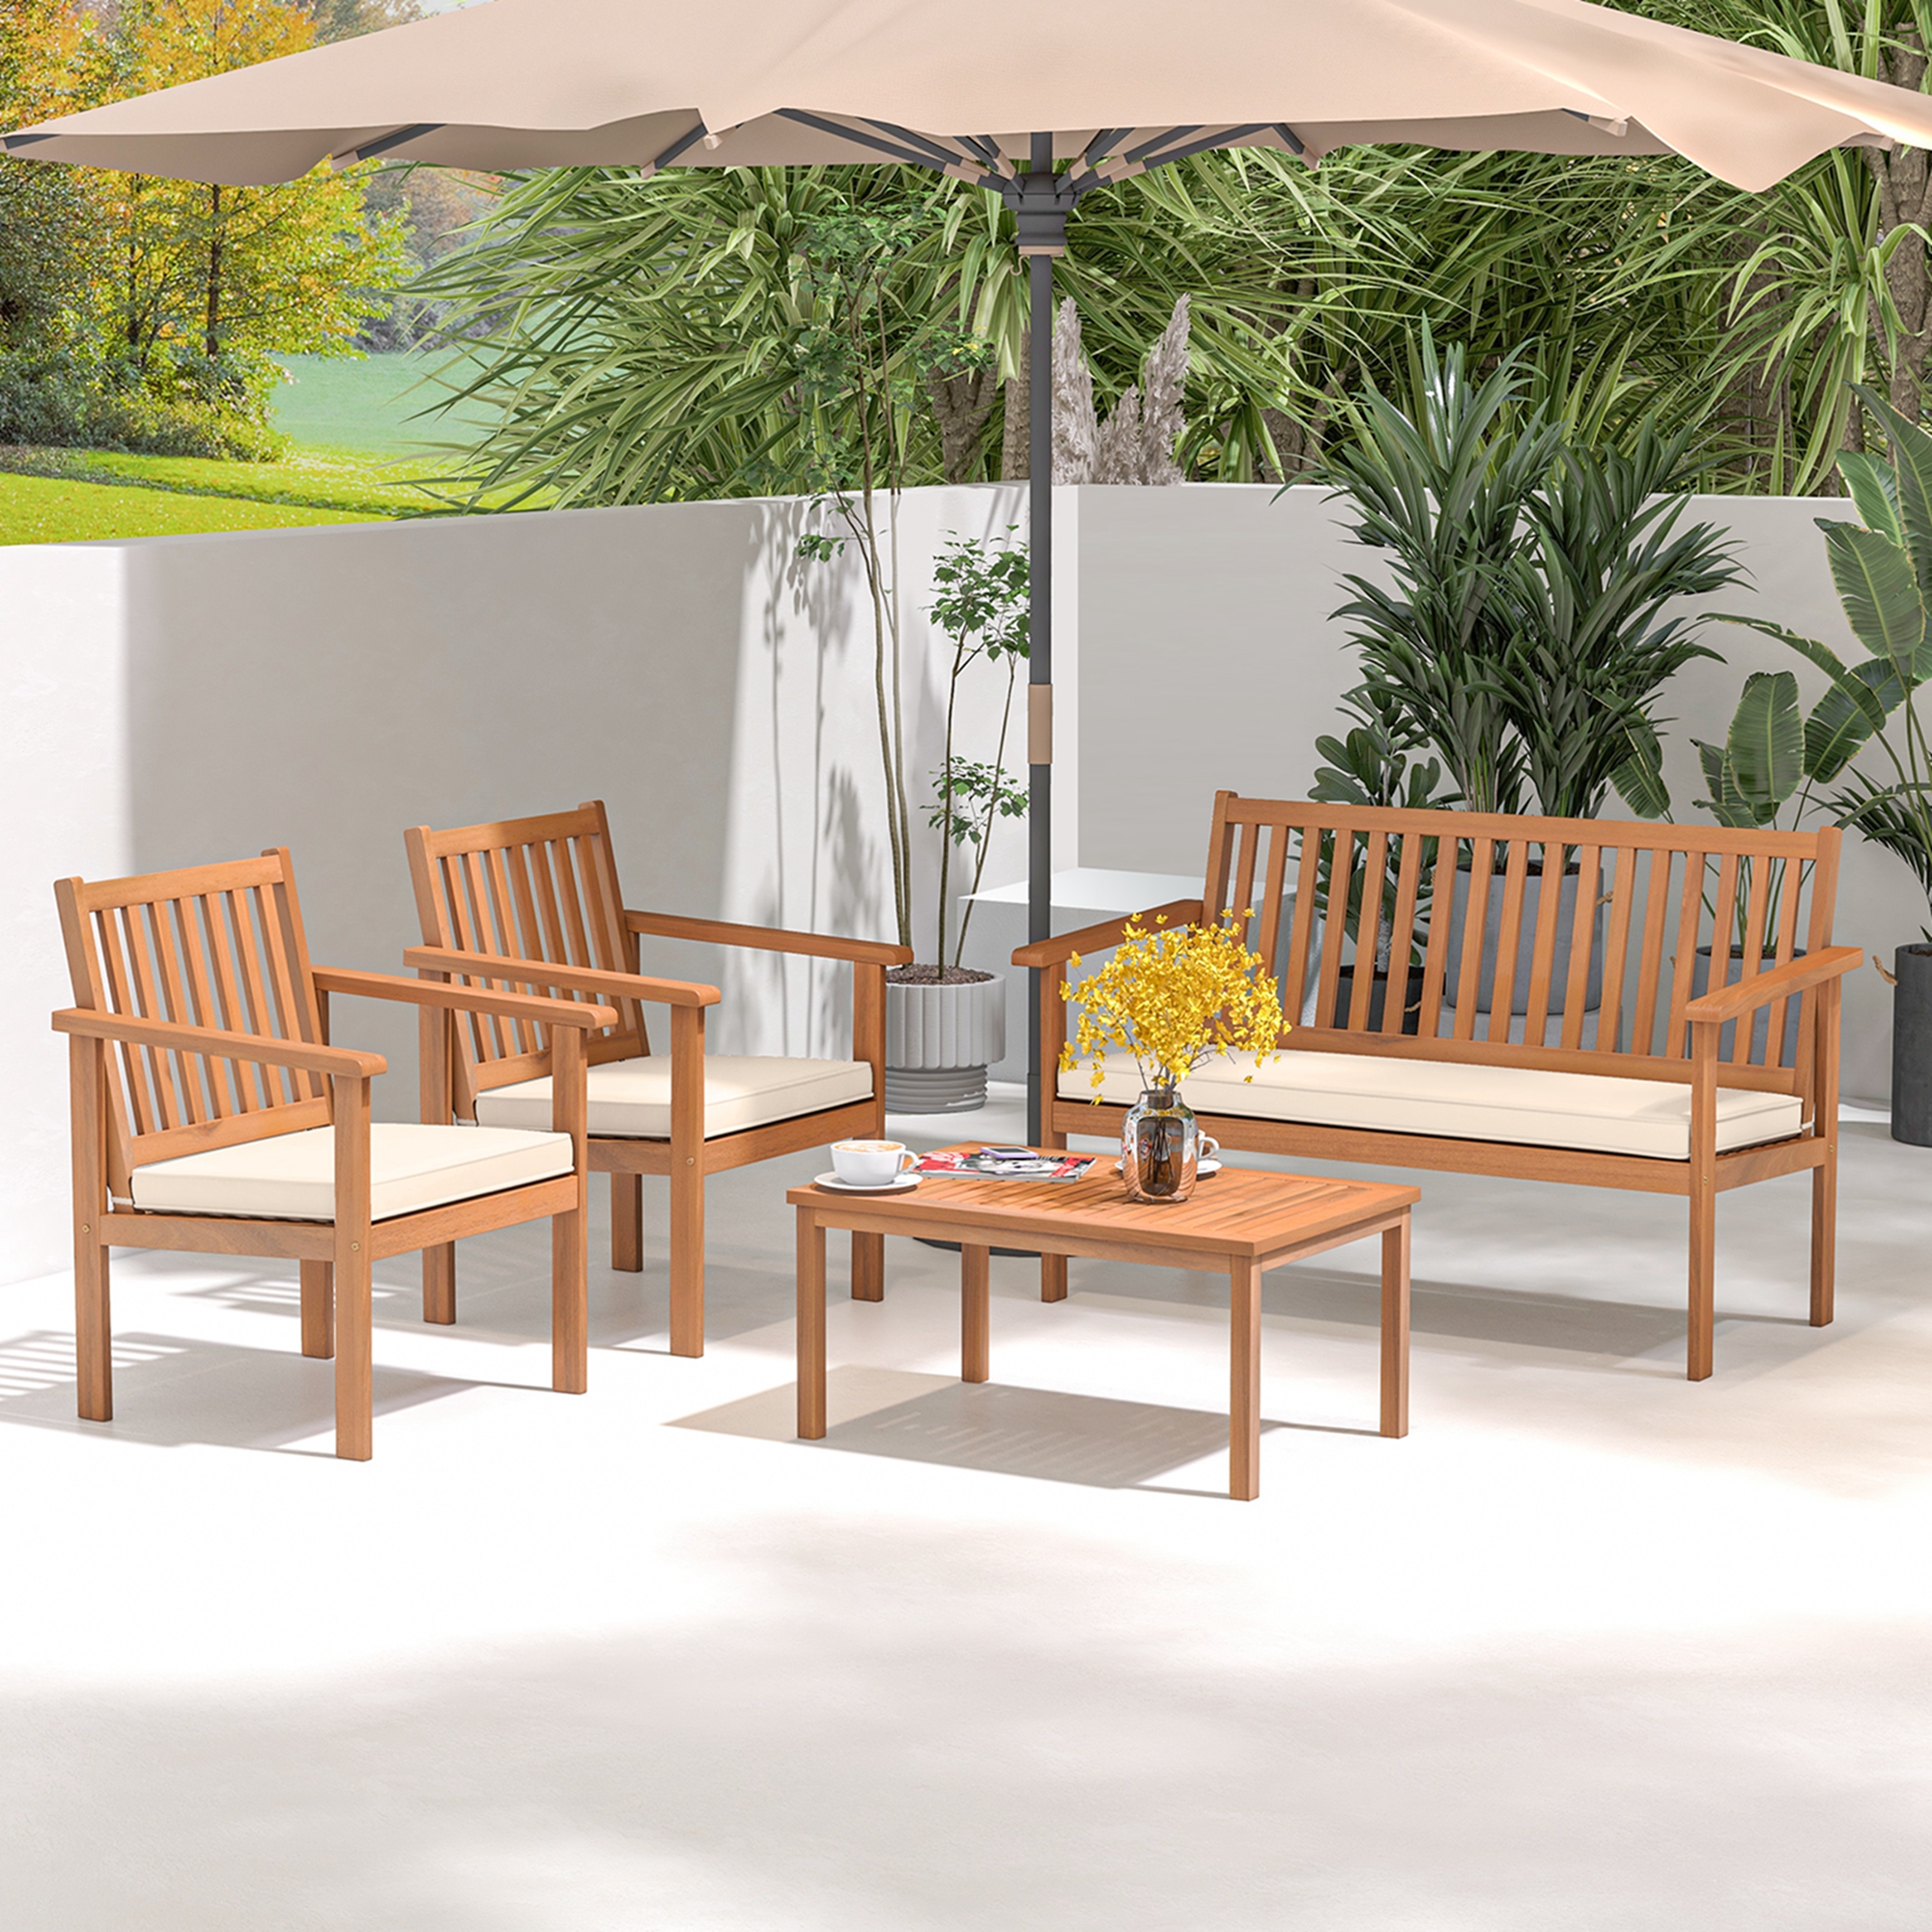 Costway 4 PCS Patio Wood Furniture Set with Loveseat, 2 Chairs & Coffee Table for Porch White - image 1 of 10